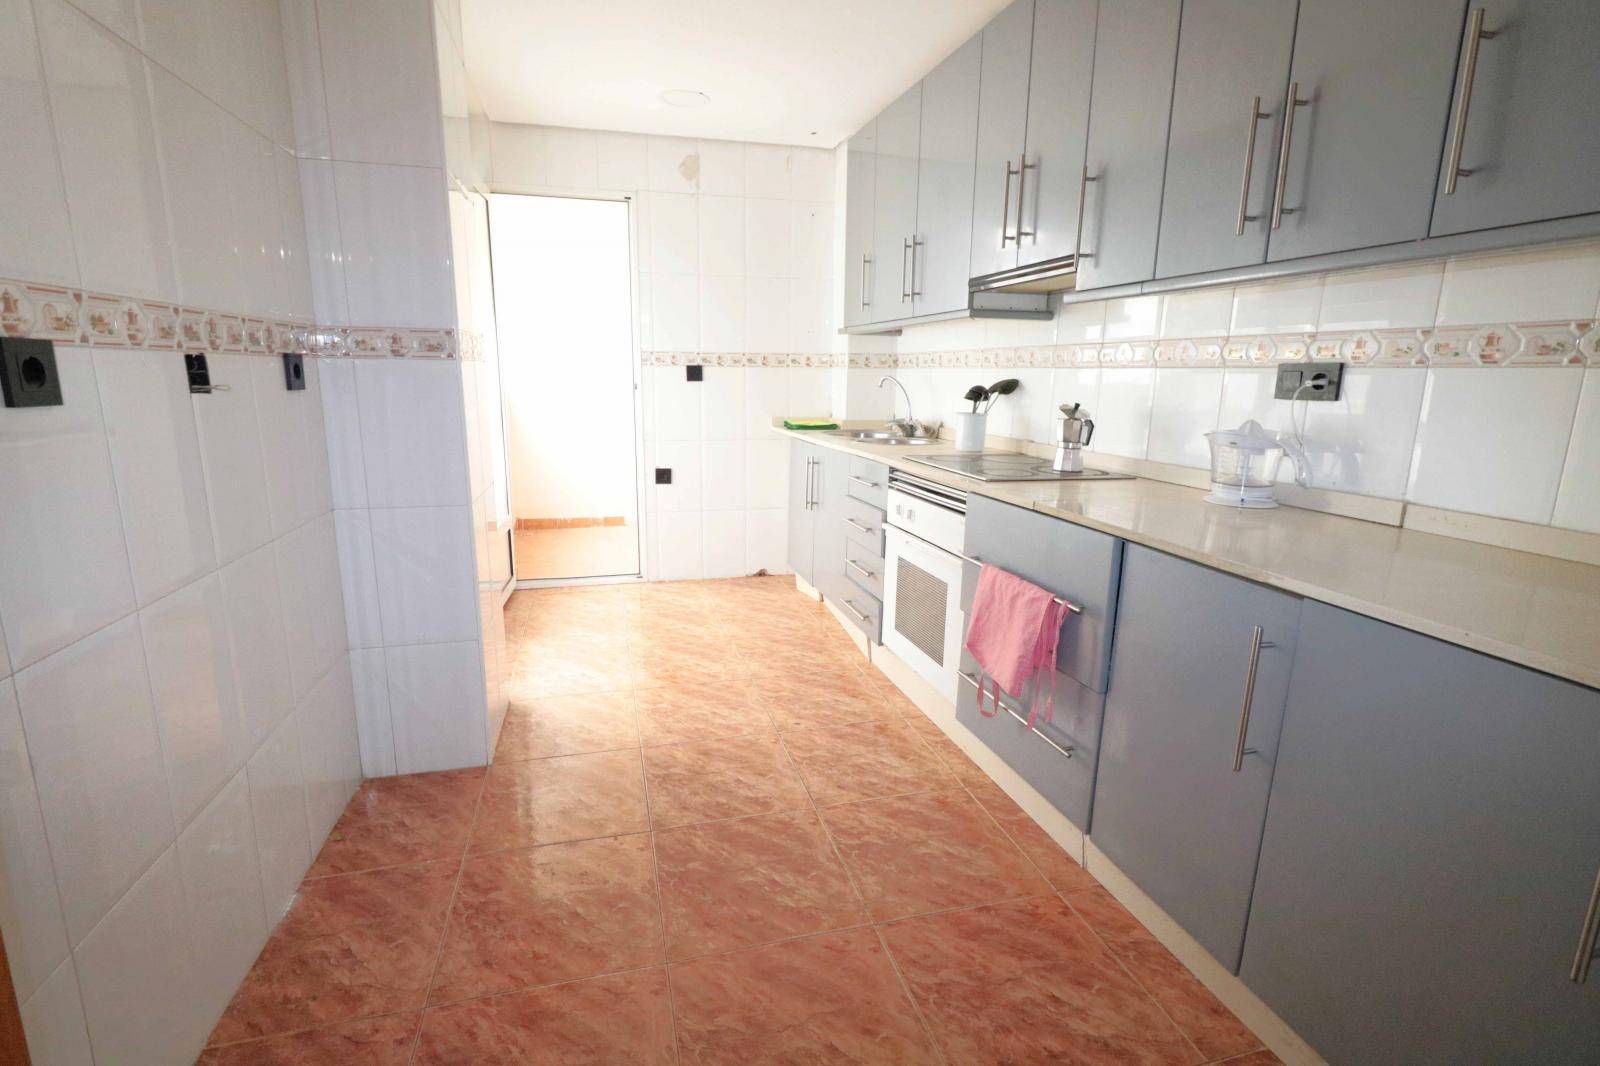 SPACIOUS 4-BEDROOM APARTMENT VERY CENTRALLY LOCATED